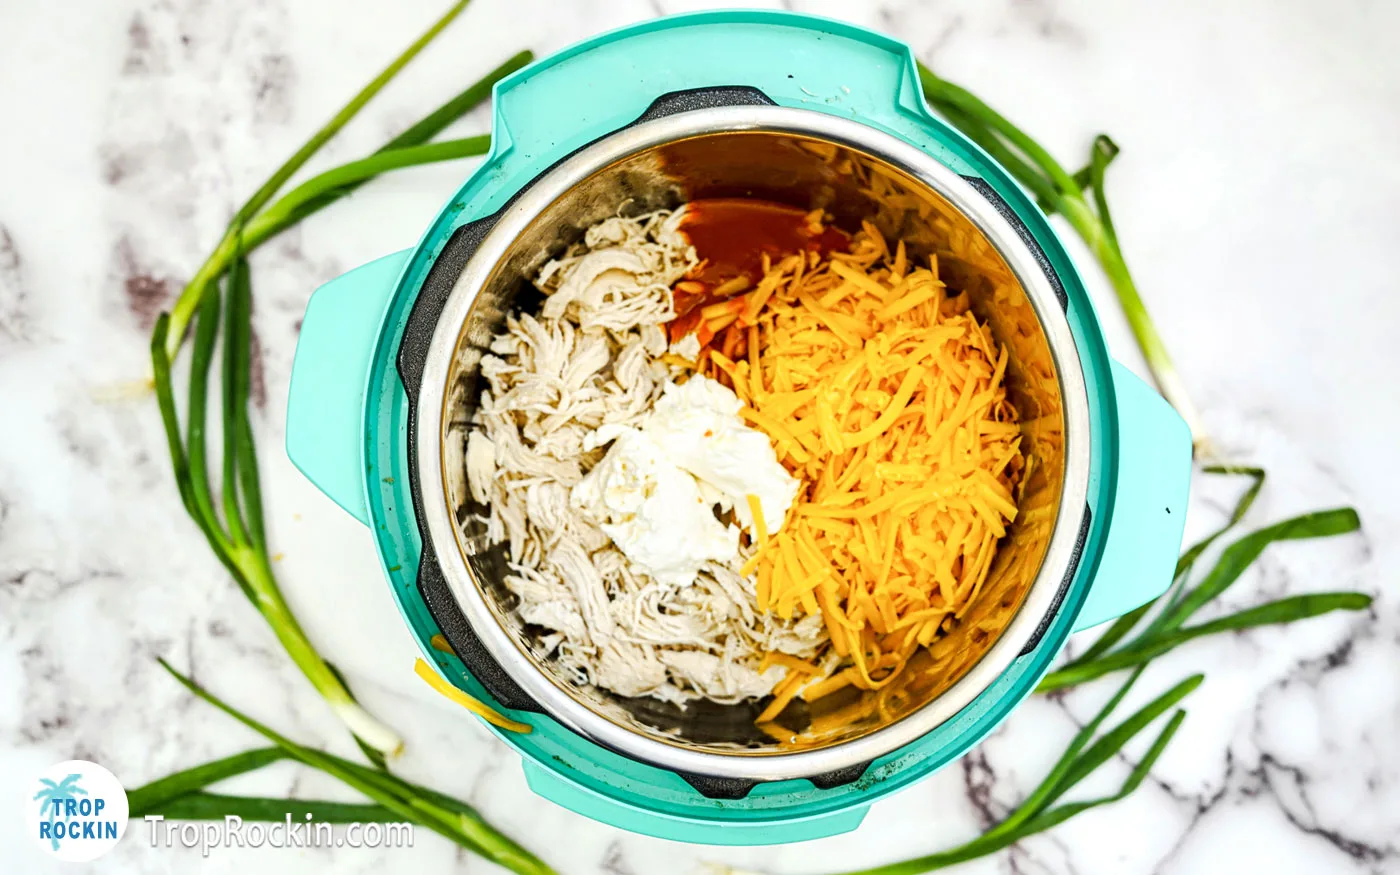 Cream Cheese, Buffalo Sauce and Shredded Cheese added on top of the shredded chicken in the instant pot.